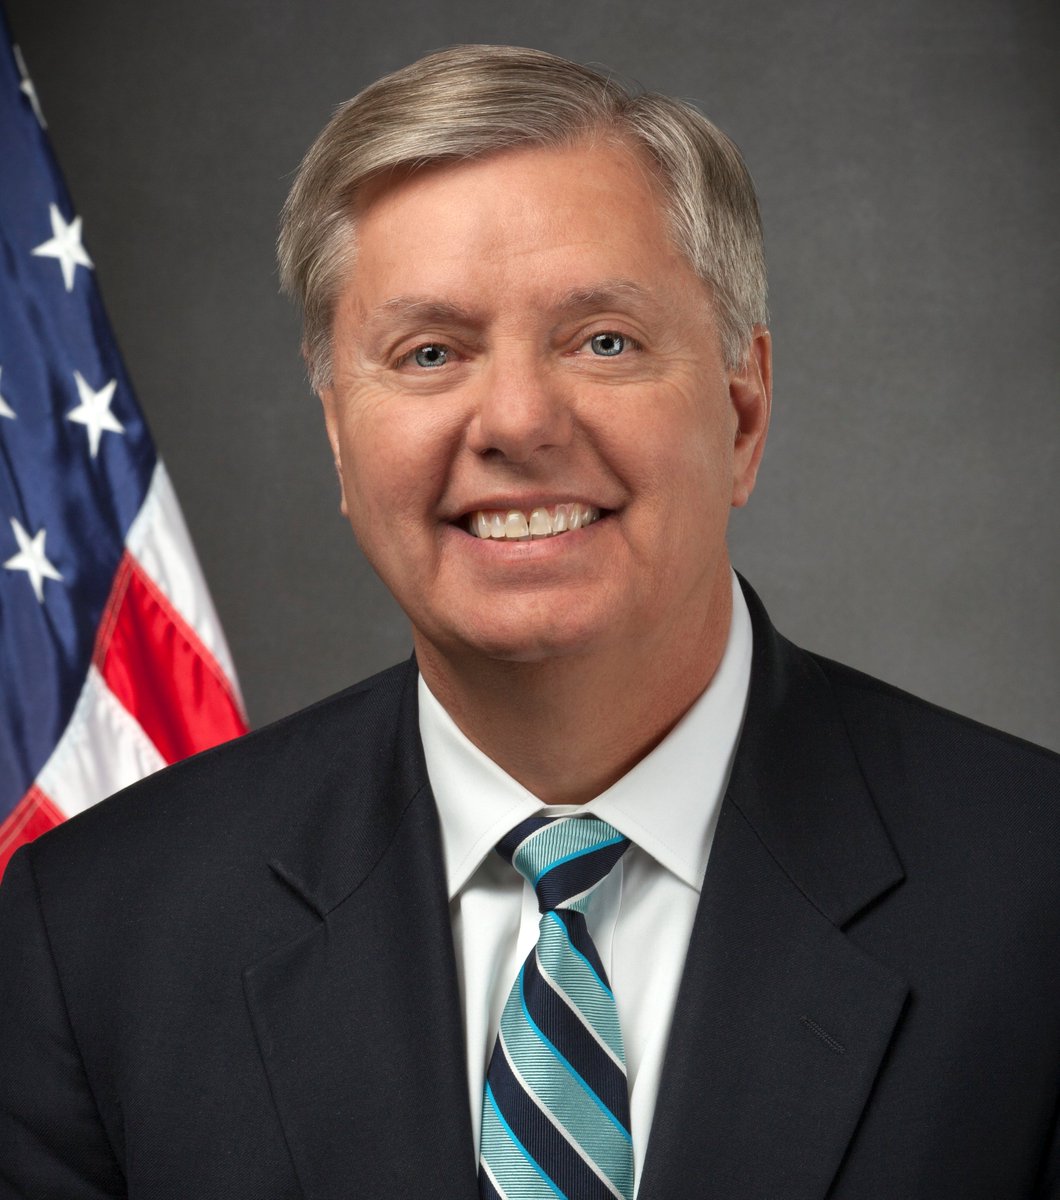 Incel of the day #5 - Lindsey GrahamLindsey is a United States senator known for sending chads to die in foreign wars. He has never had a gf, been kissed, hugged, or held hands with a girl. If elected president, he has said that his imouto would "play the role" of First Lady.